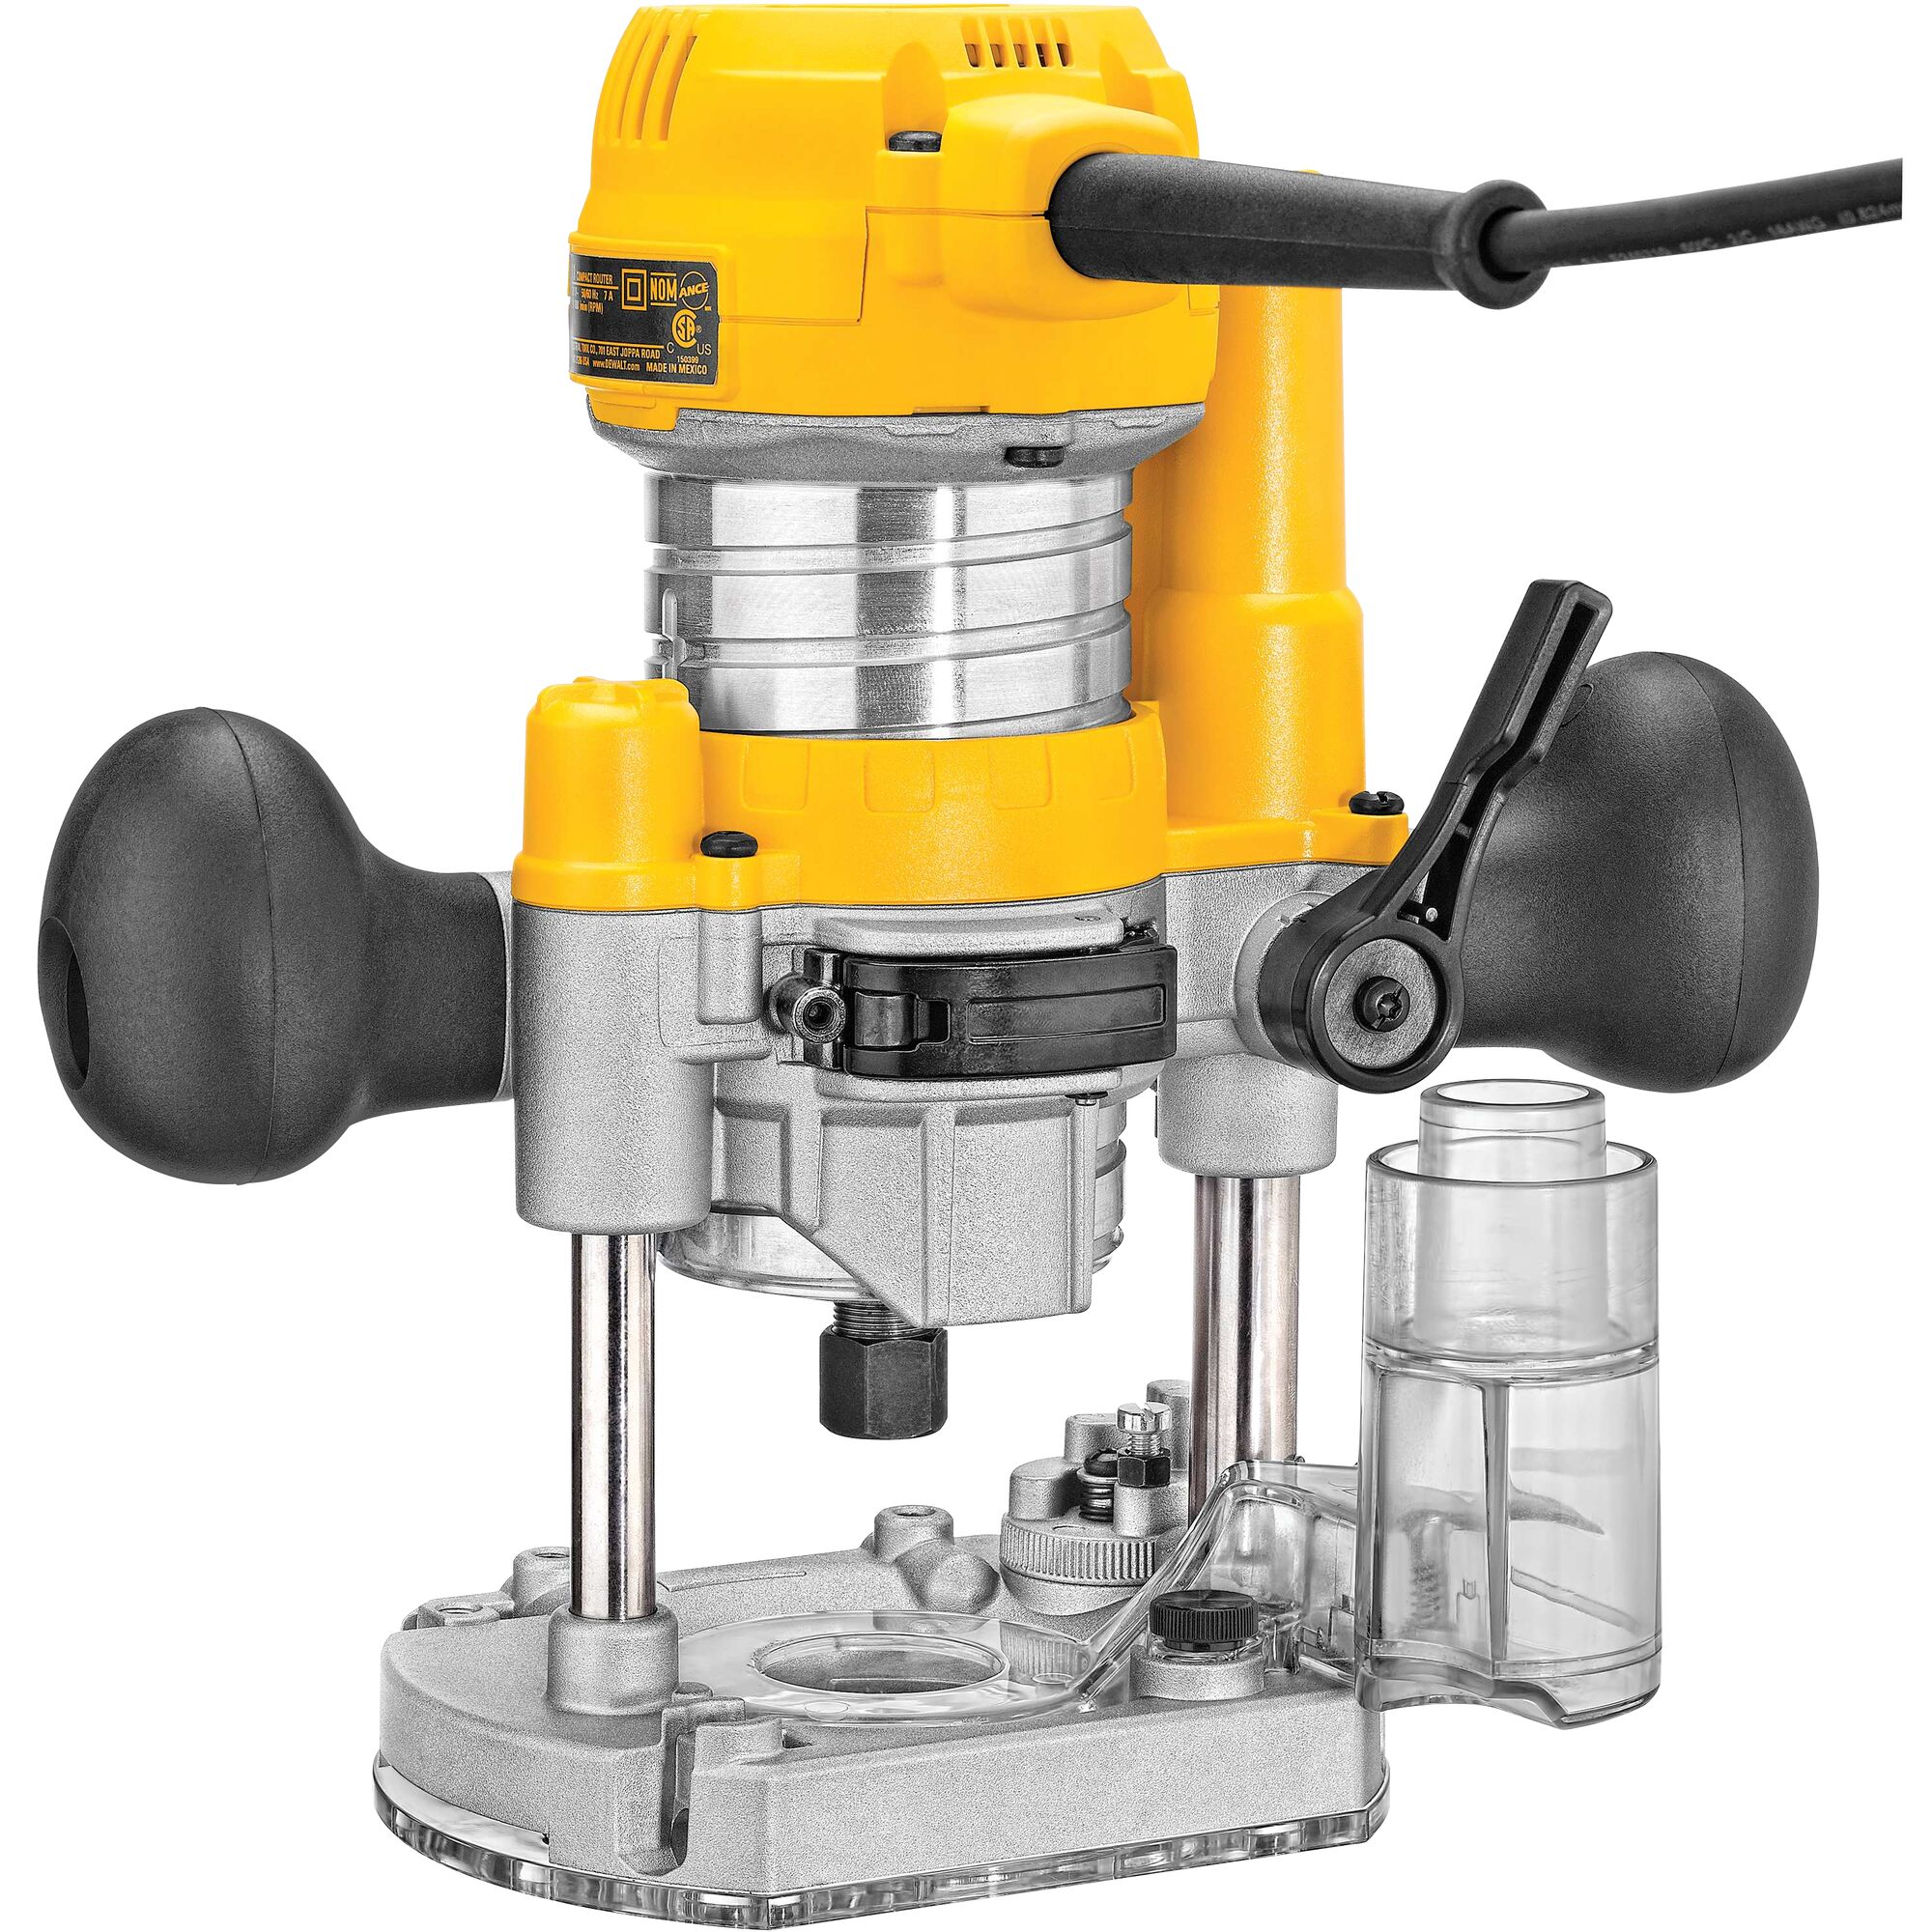 DEWALT Plunge Base For Compact Router, Steel Rods for Smooth